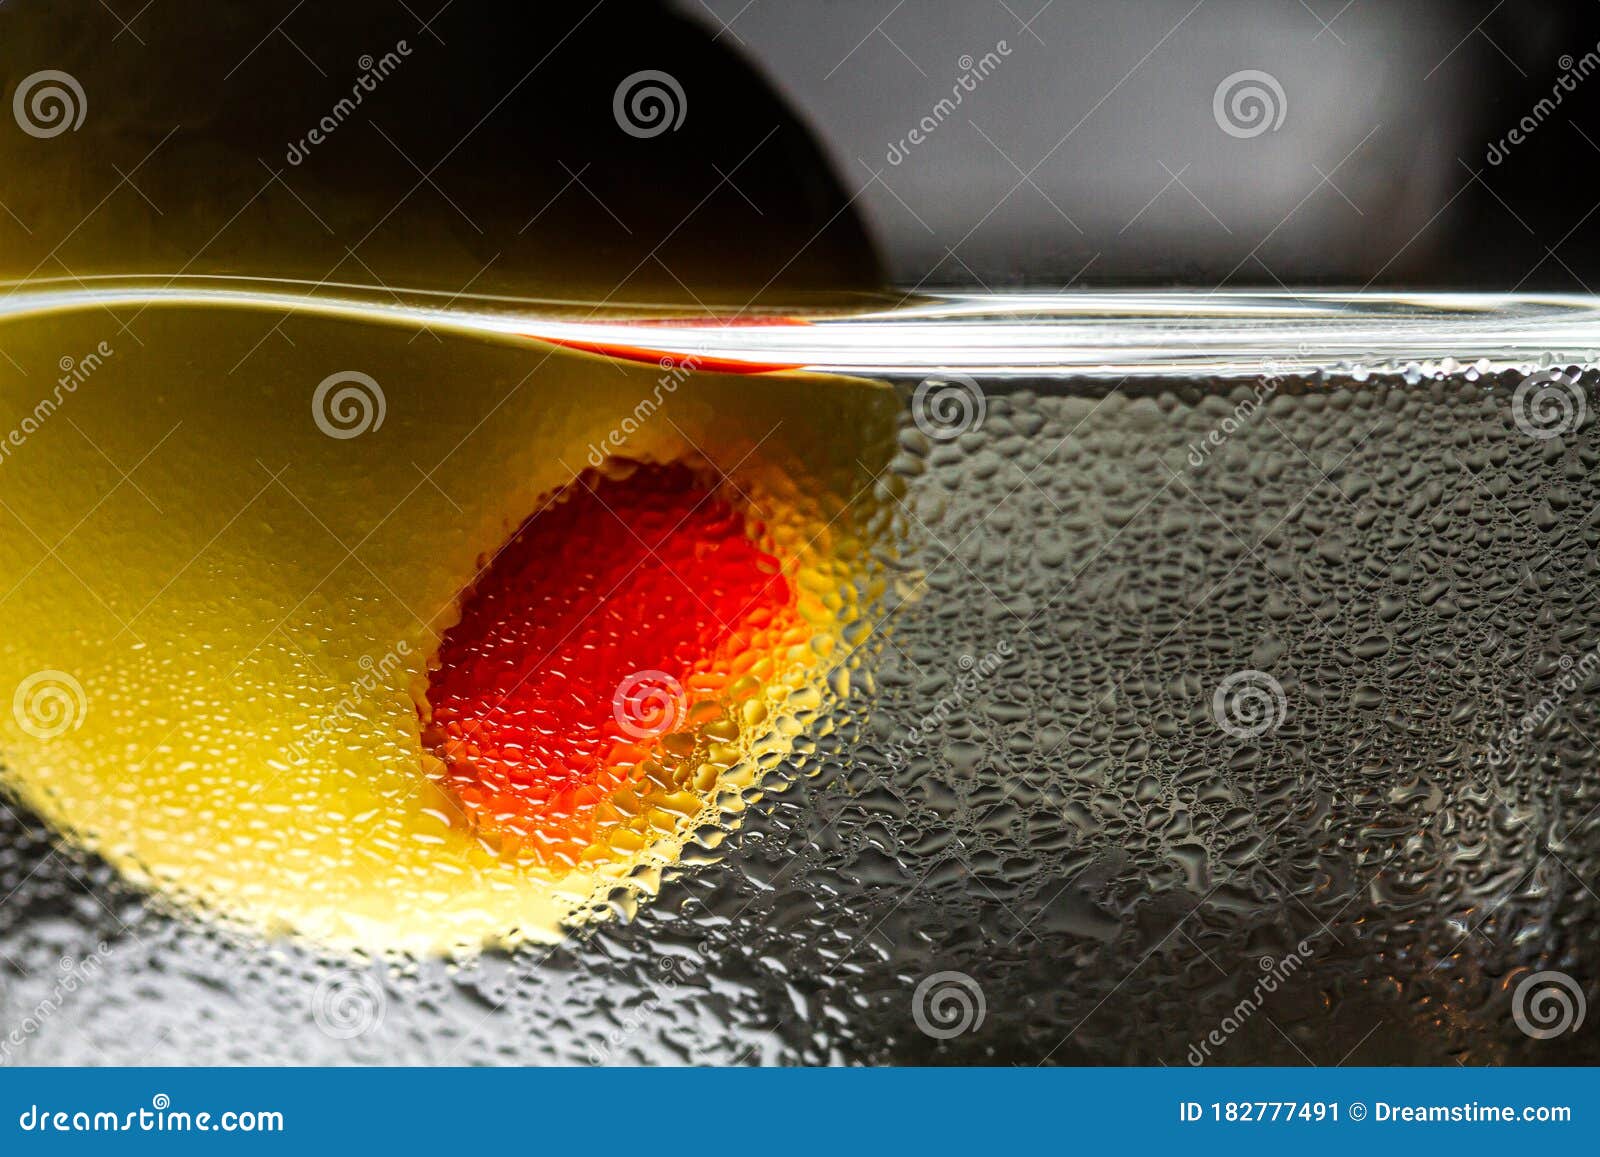 close-up of olive with pepper in a martini glass with drops